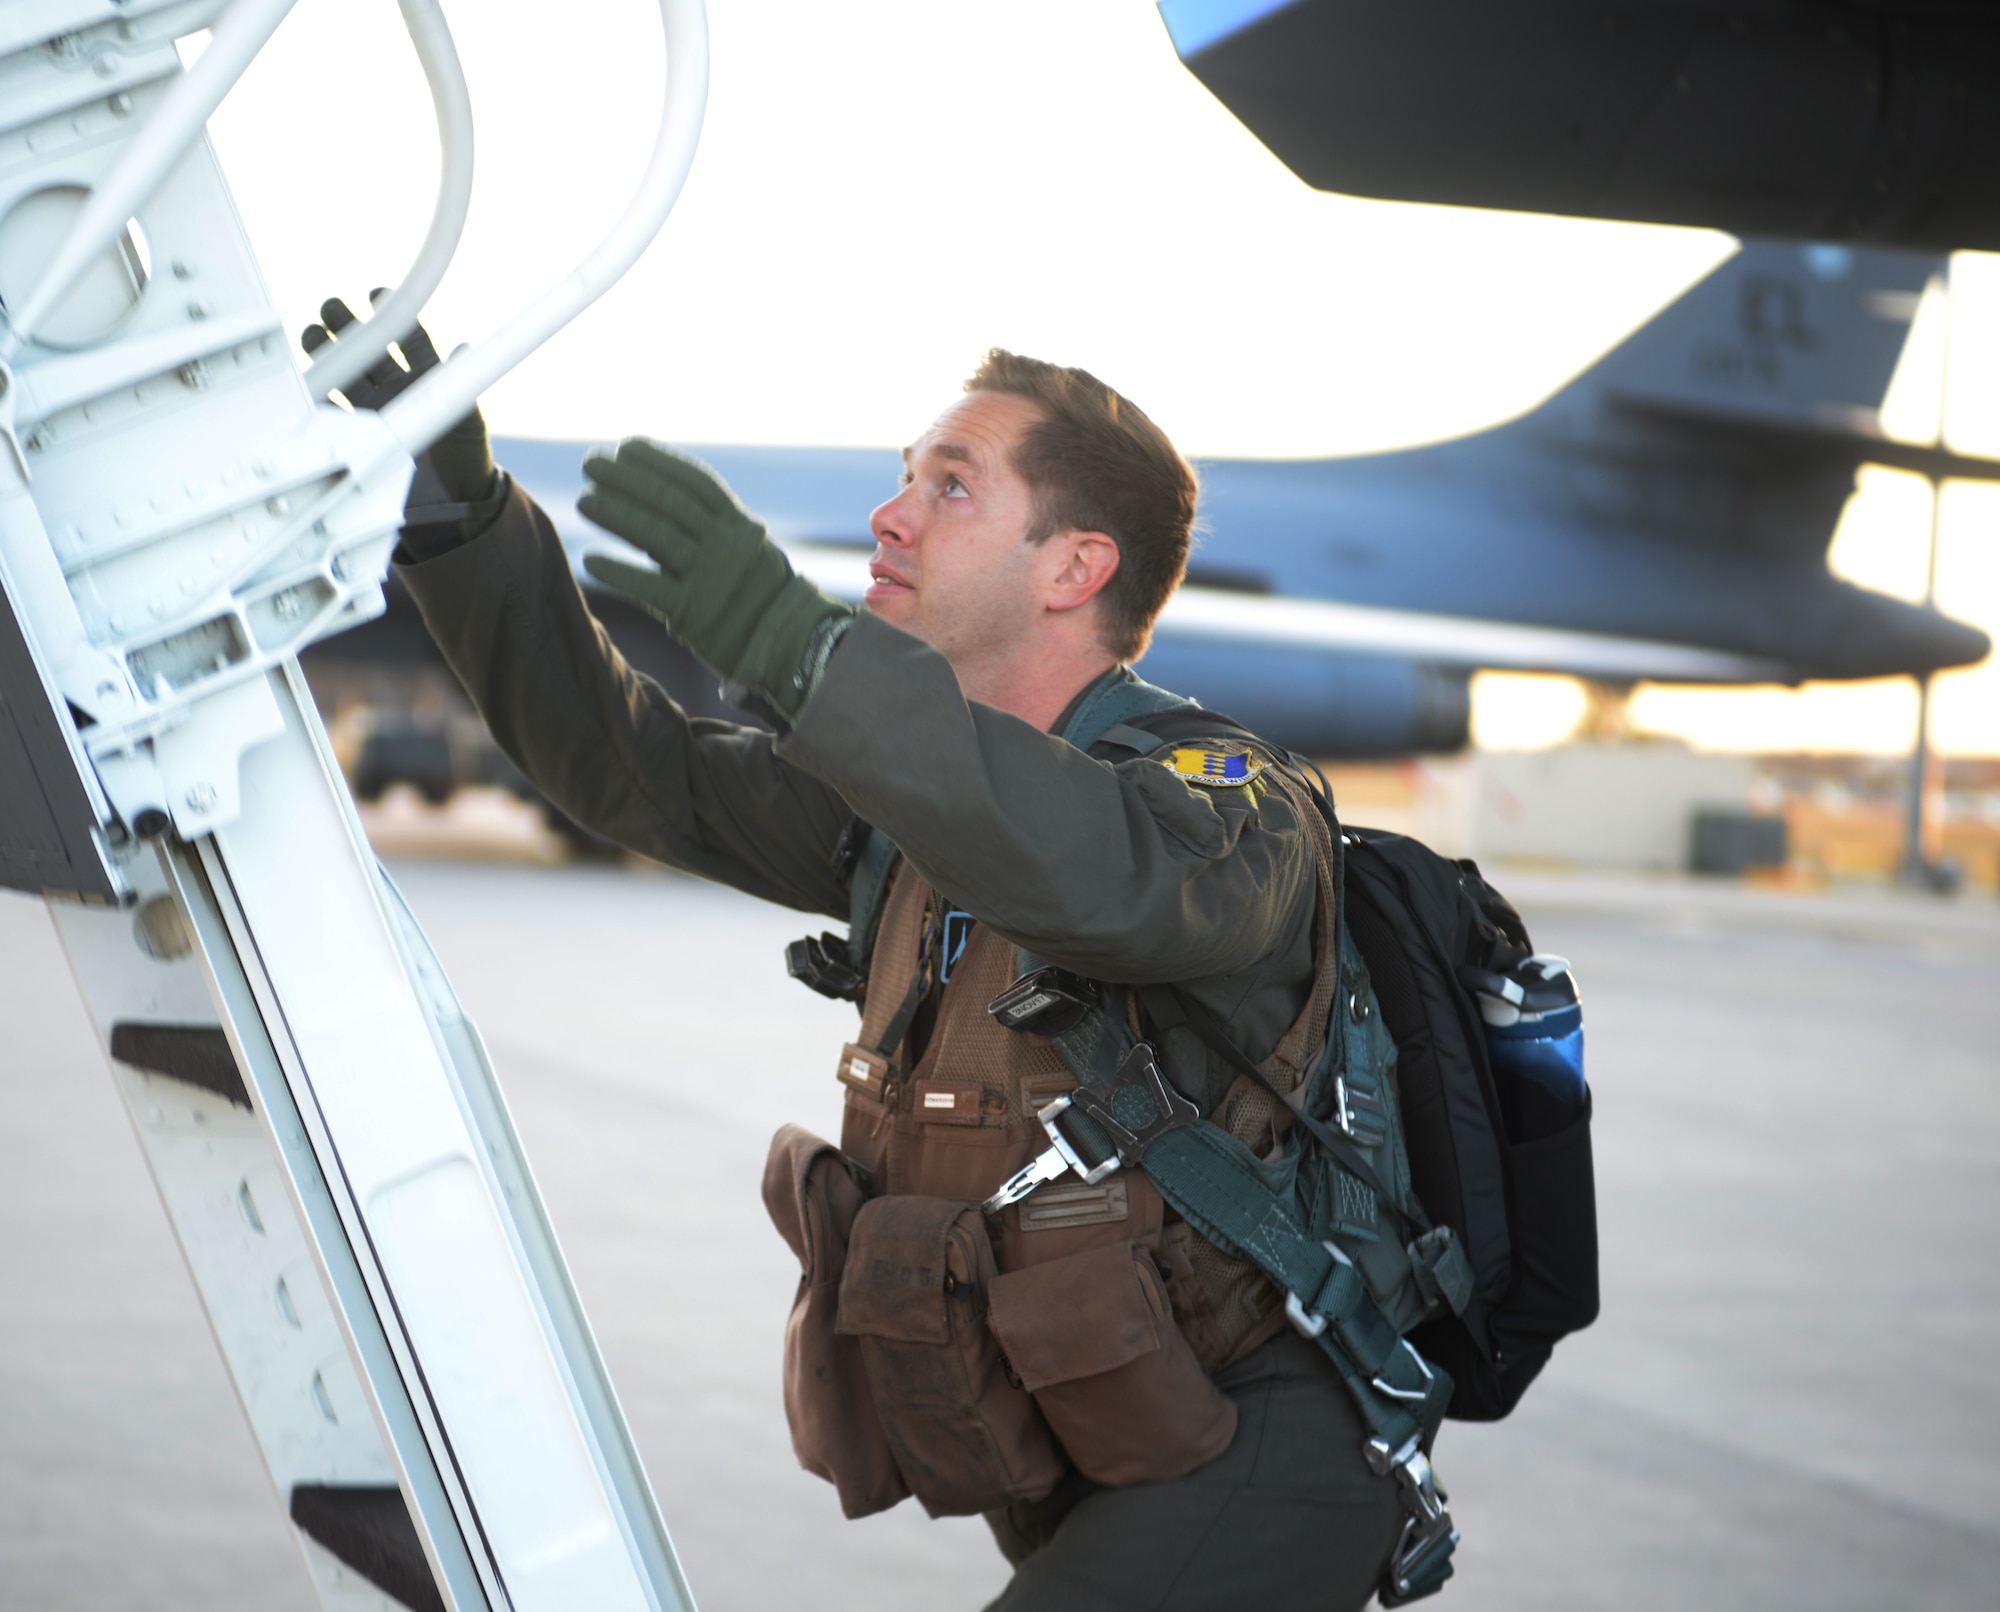 Capt. Ryan Koelling, a weapons system officer assigned to the 34th Bomb Squadron, boards a B-1 Bomber at Ellsworth Air Force Base, S.D., Oct. 18, 2017. Approximately 200 Ellsworth Airmen departed for Nellis AFB, to train with Joint Terminal Attack Controllers and soldiers from U.S. Army National Training Center in Fort Irwin, Calif., as part of Green Flag exercise 18-1. (U.S. Air Force photo by Airman 1st Class Thomas Karol)